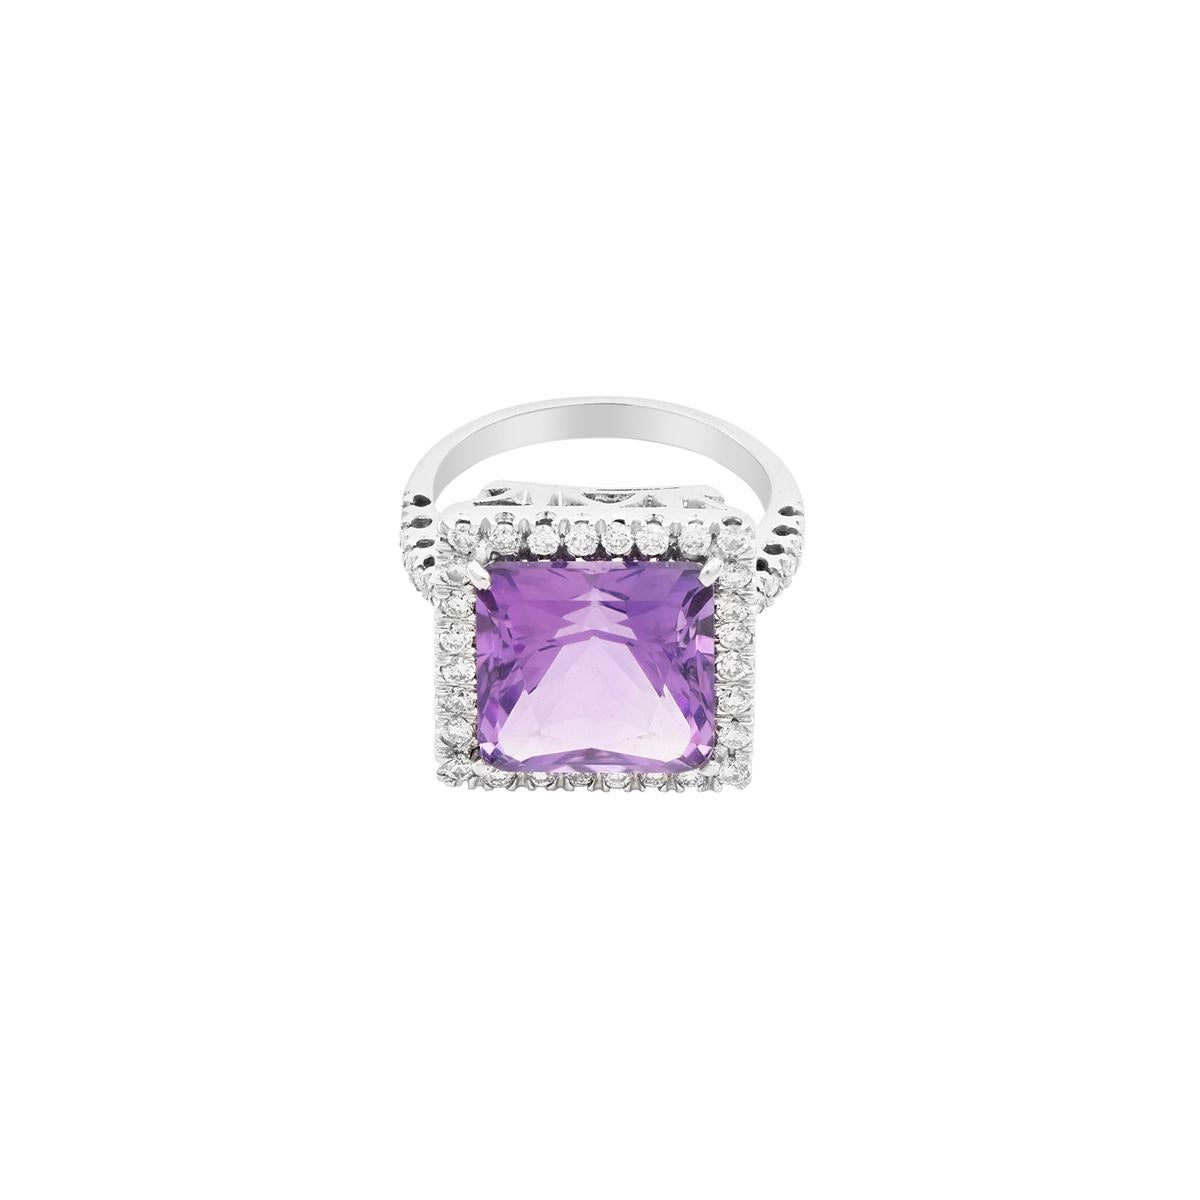 This fairy-tale-inspired ring features a princess-cut amethyst with a diamond halo. It is centered on an 18 Kt white gold, diamond-pavé shank. 
The ring features a sizable amethyst surrounded by diamonds, which are also placed along the shoulder.